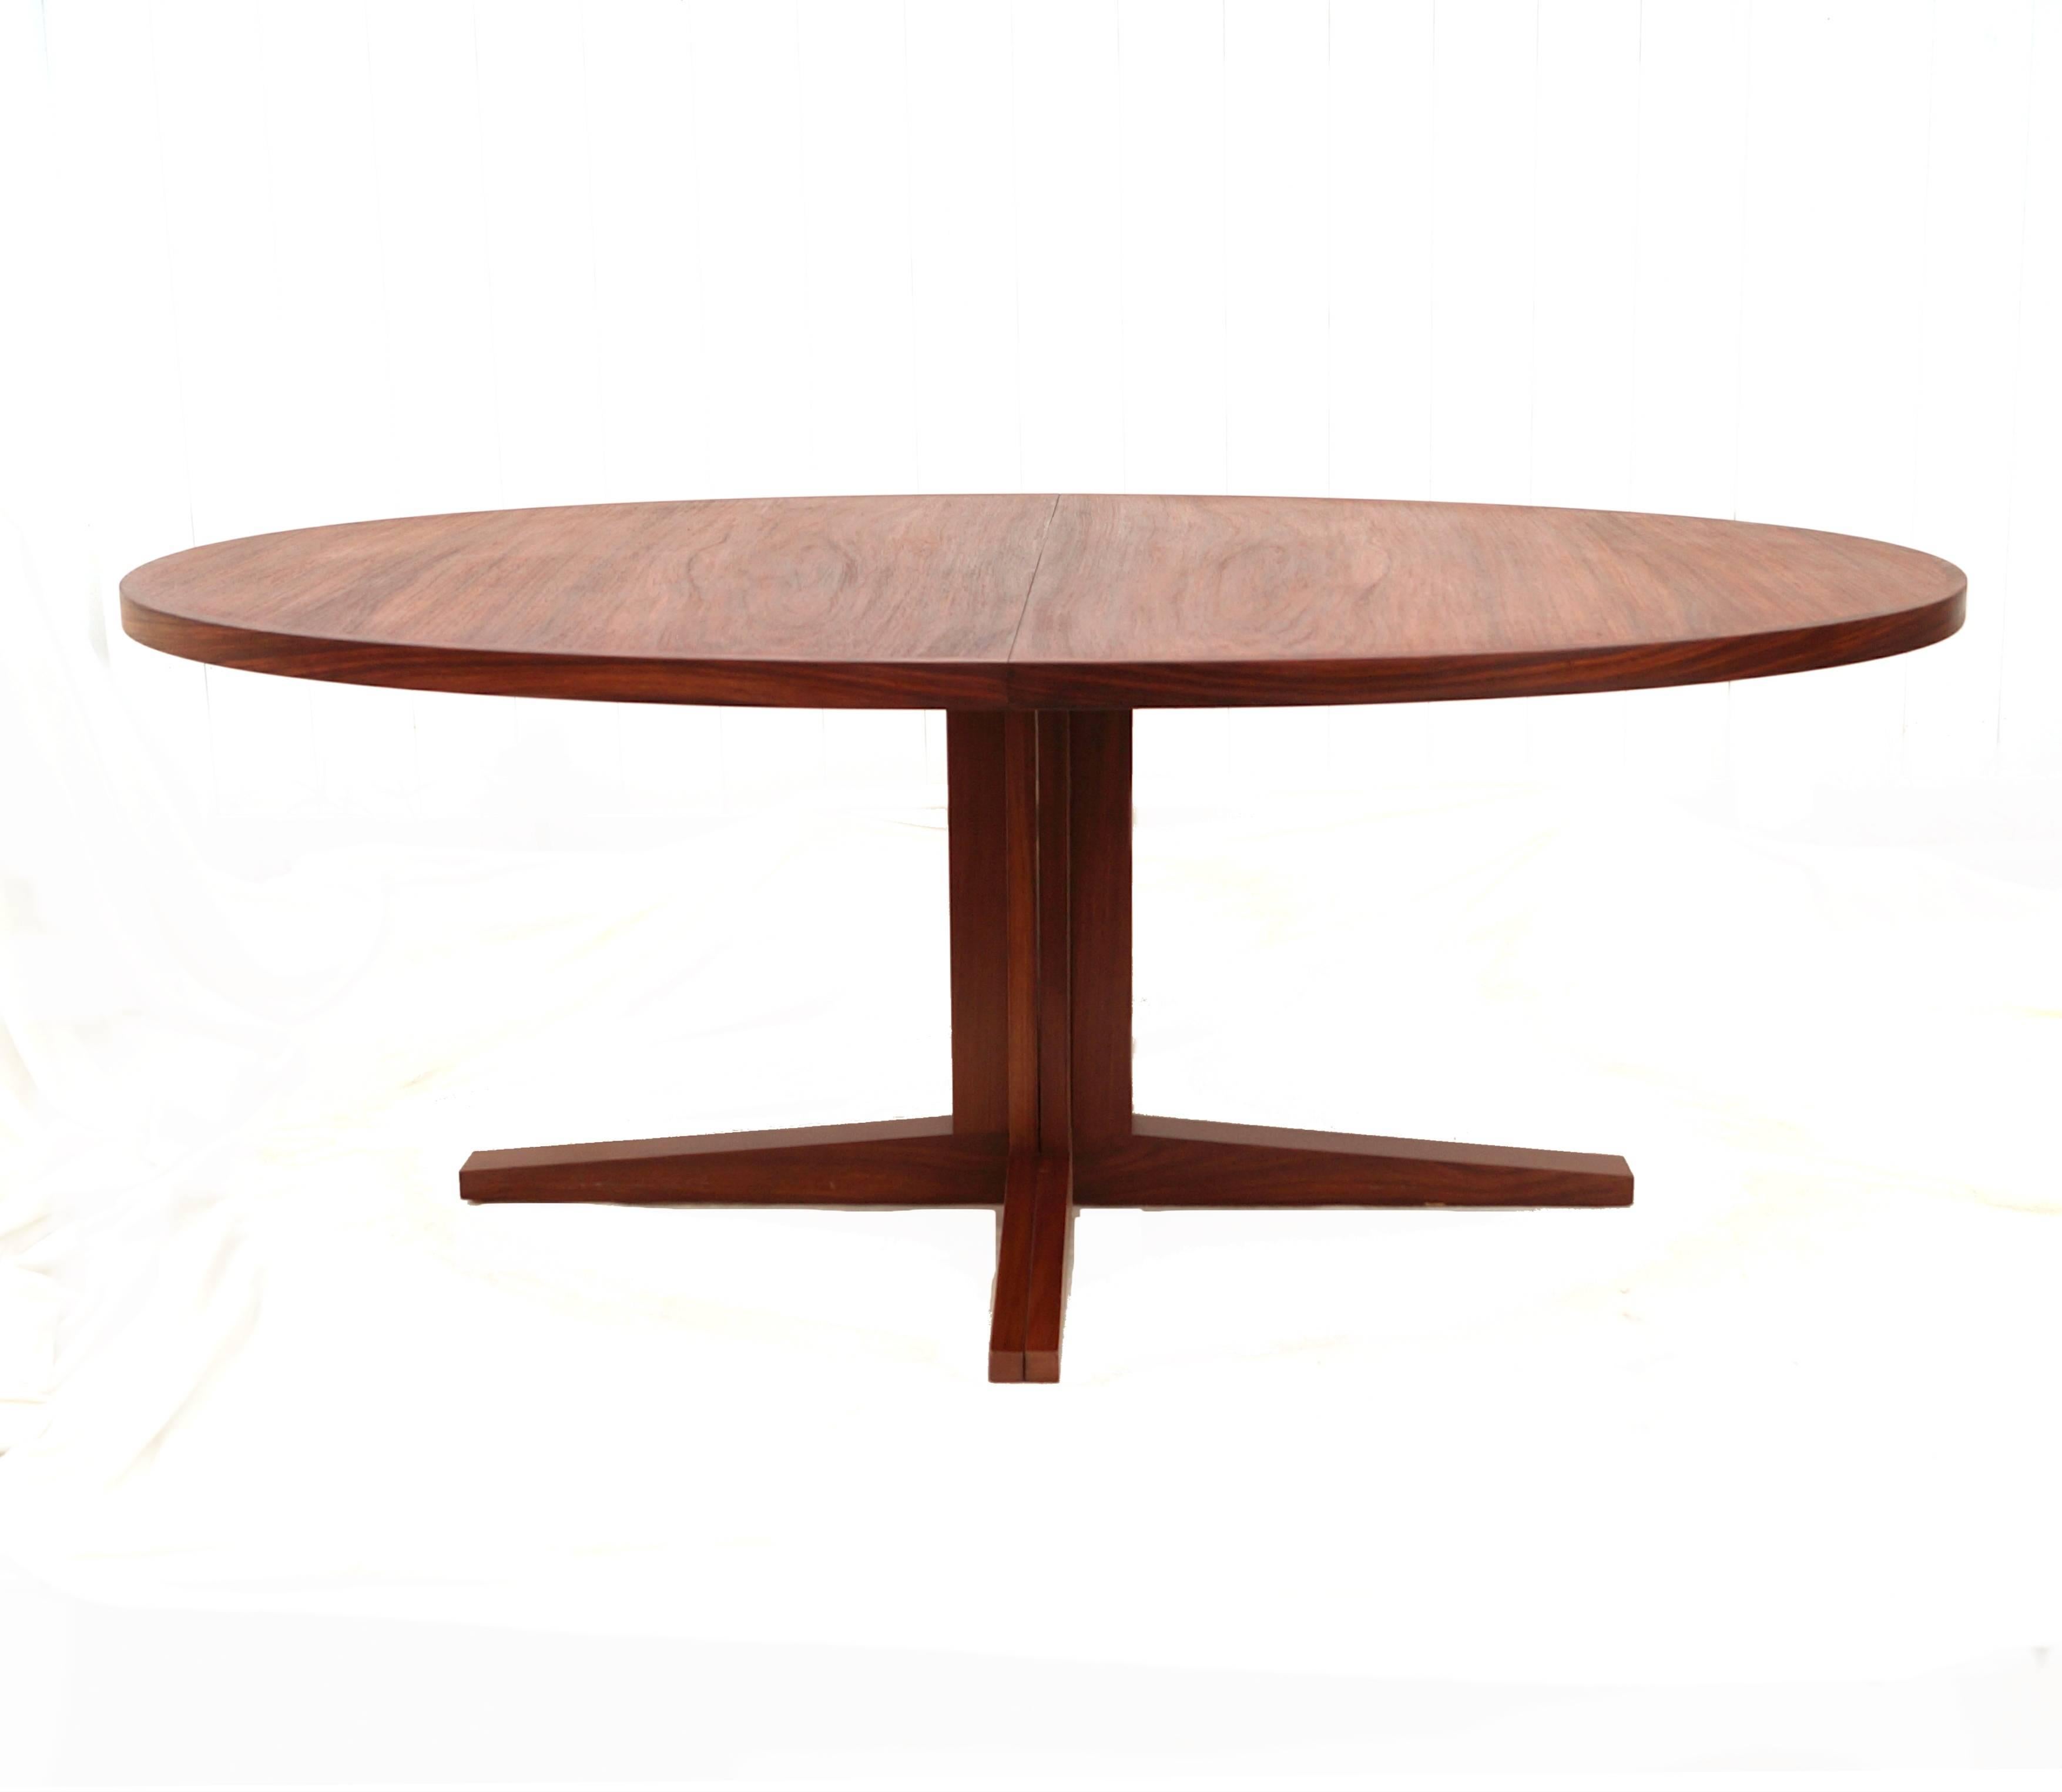 John Mortensen expandable rosewood dining conference table. Measure: 74.5